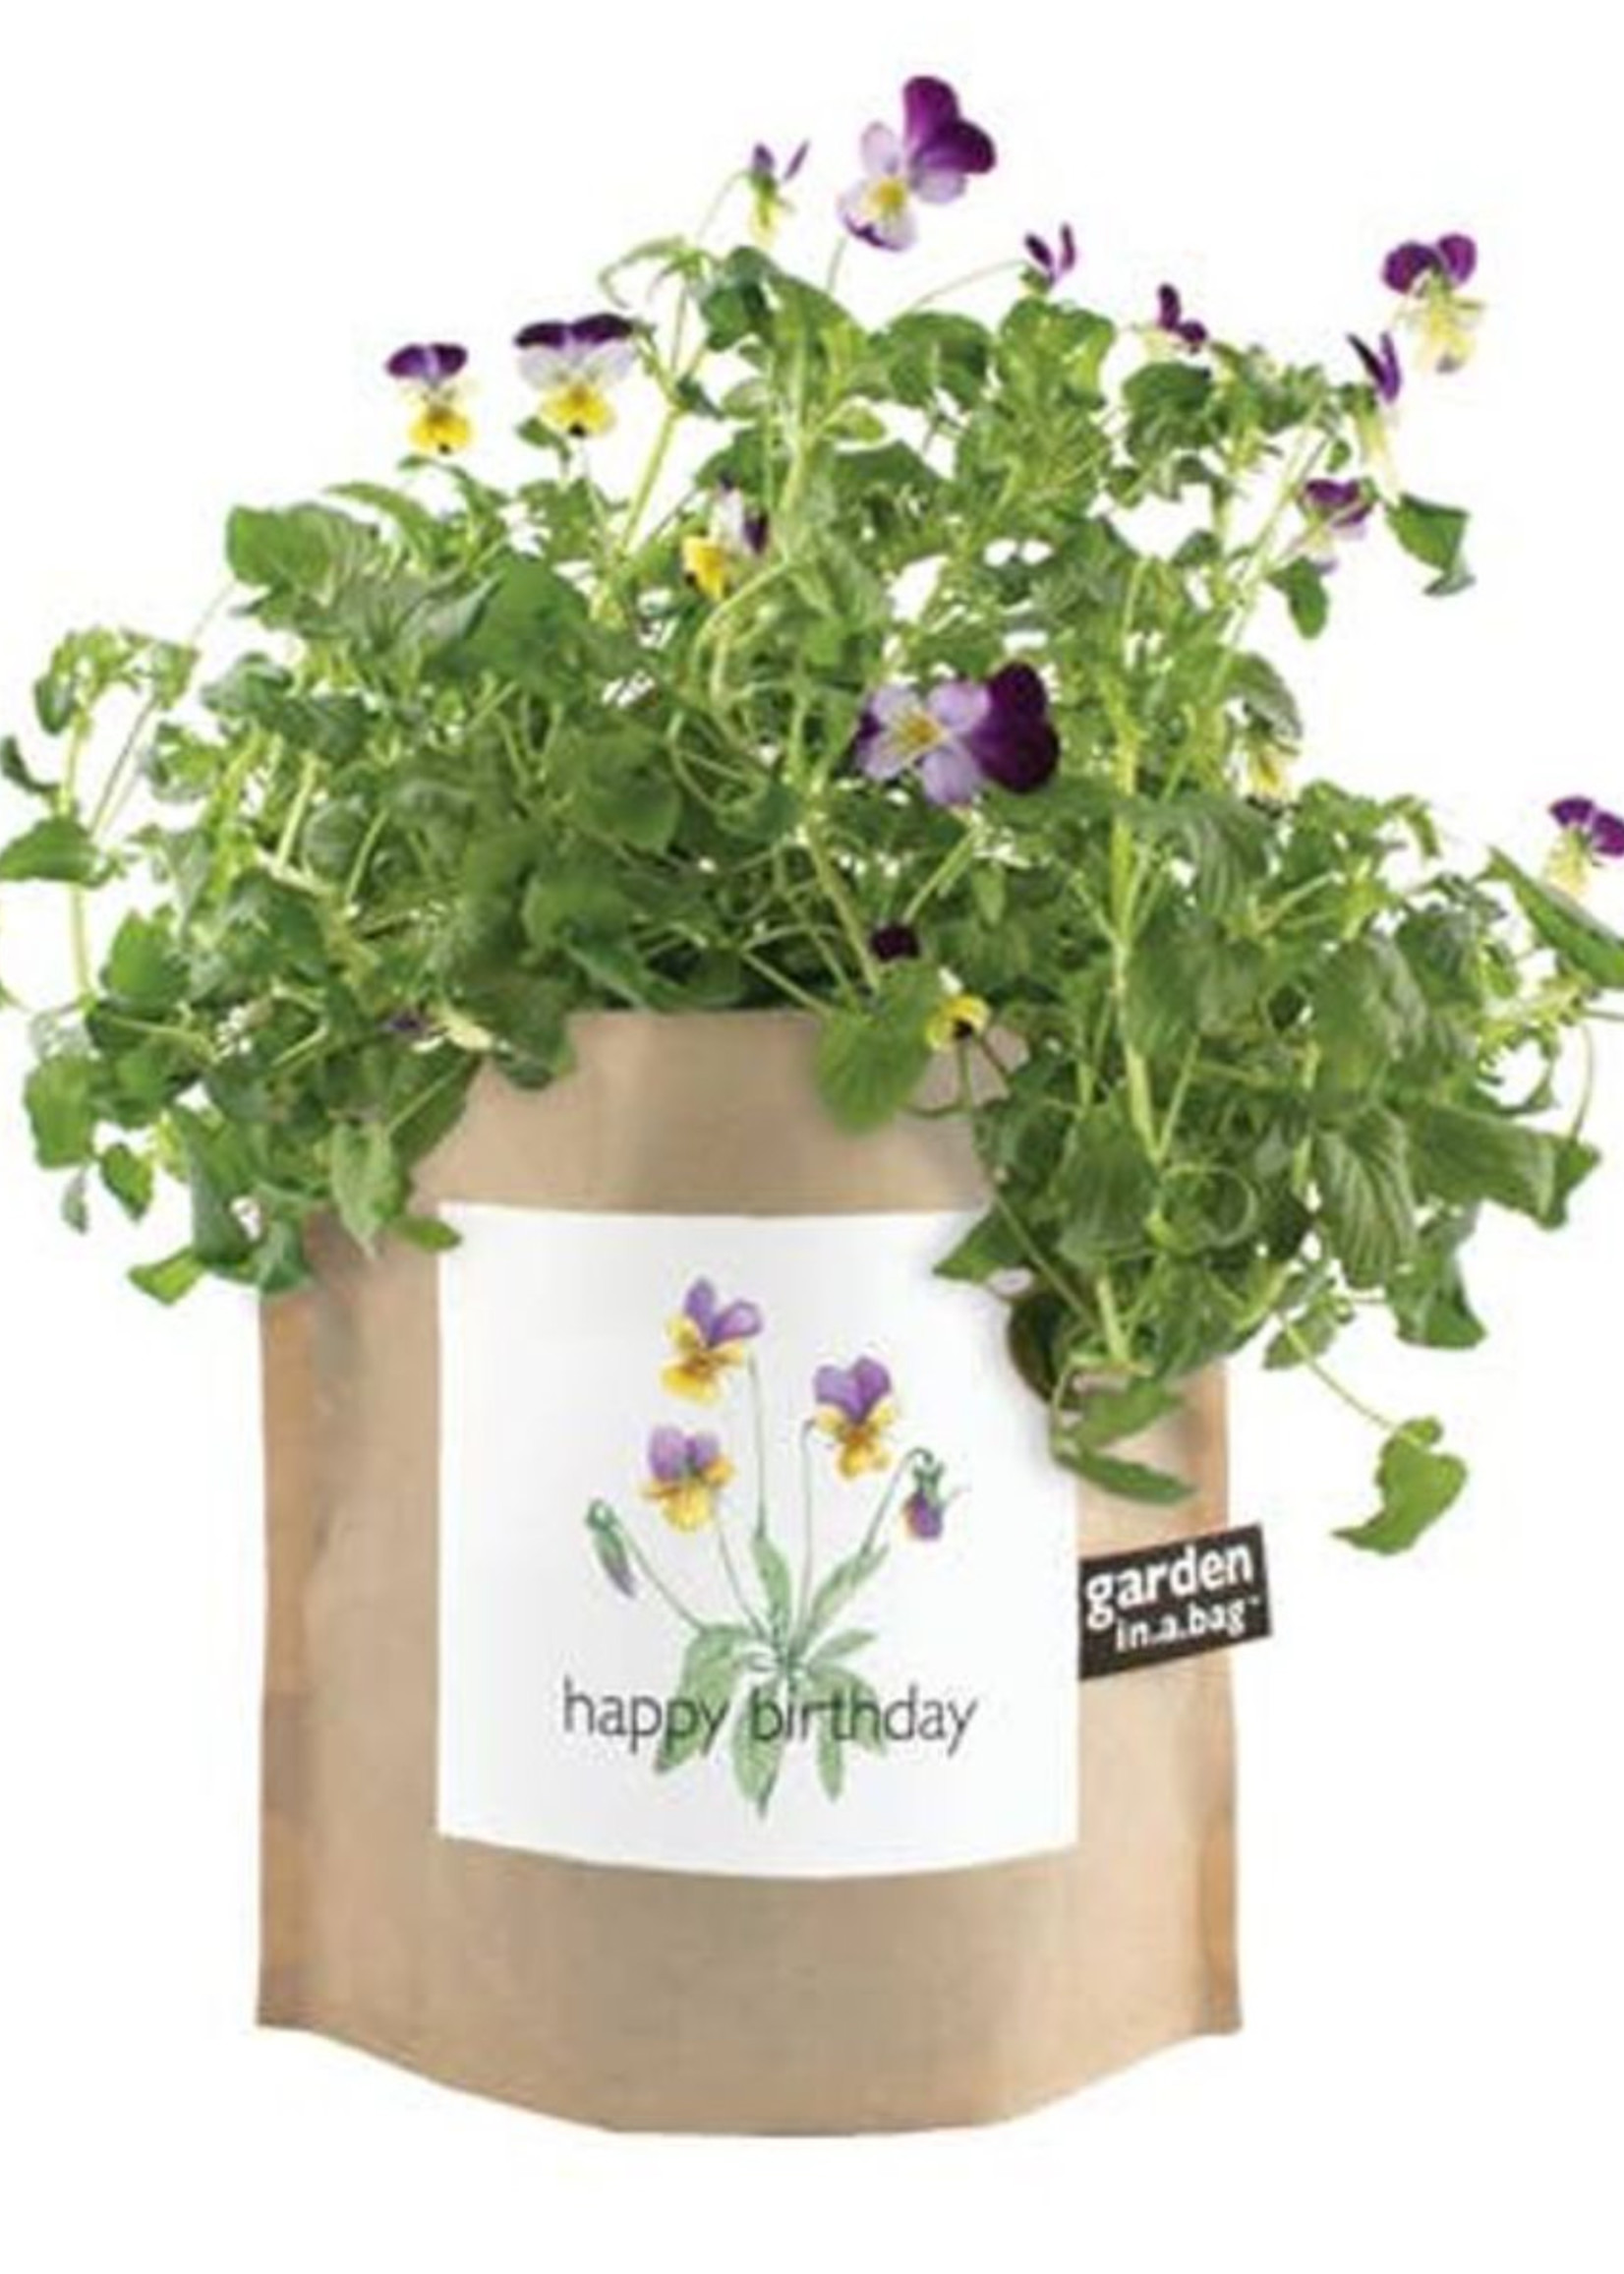 Potting Shed Garden in a Bag | Happy Birthday